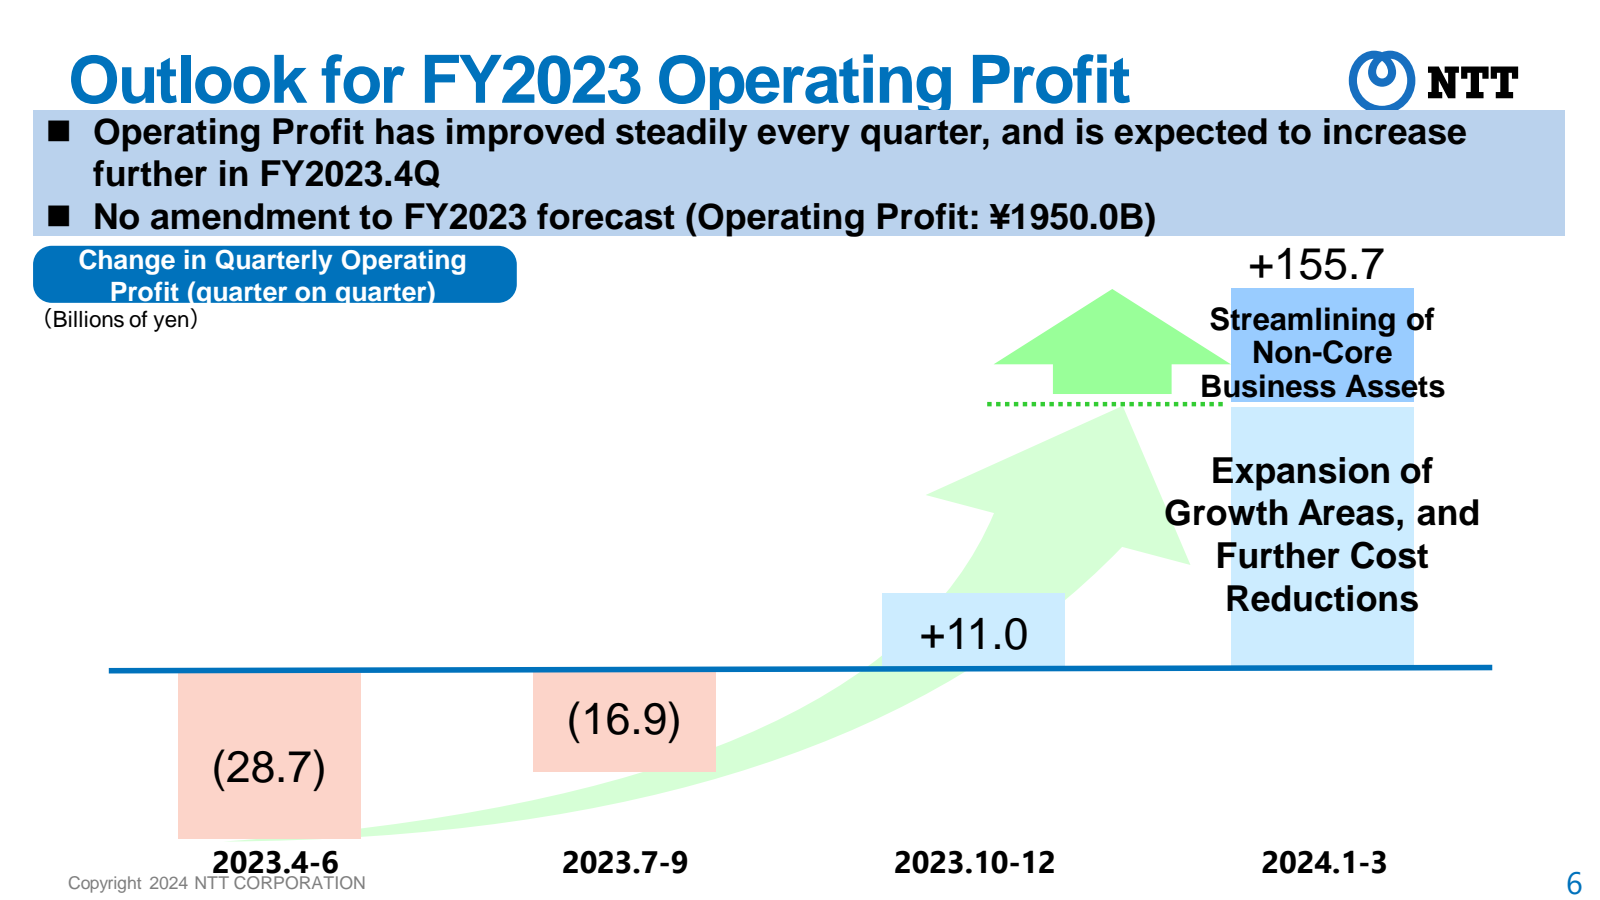 Outlook for FY2023 O